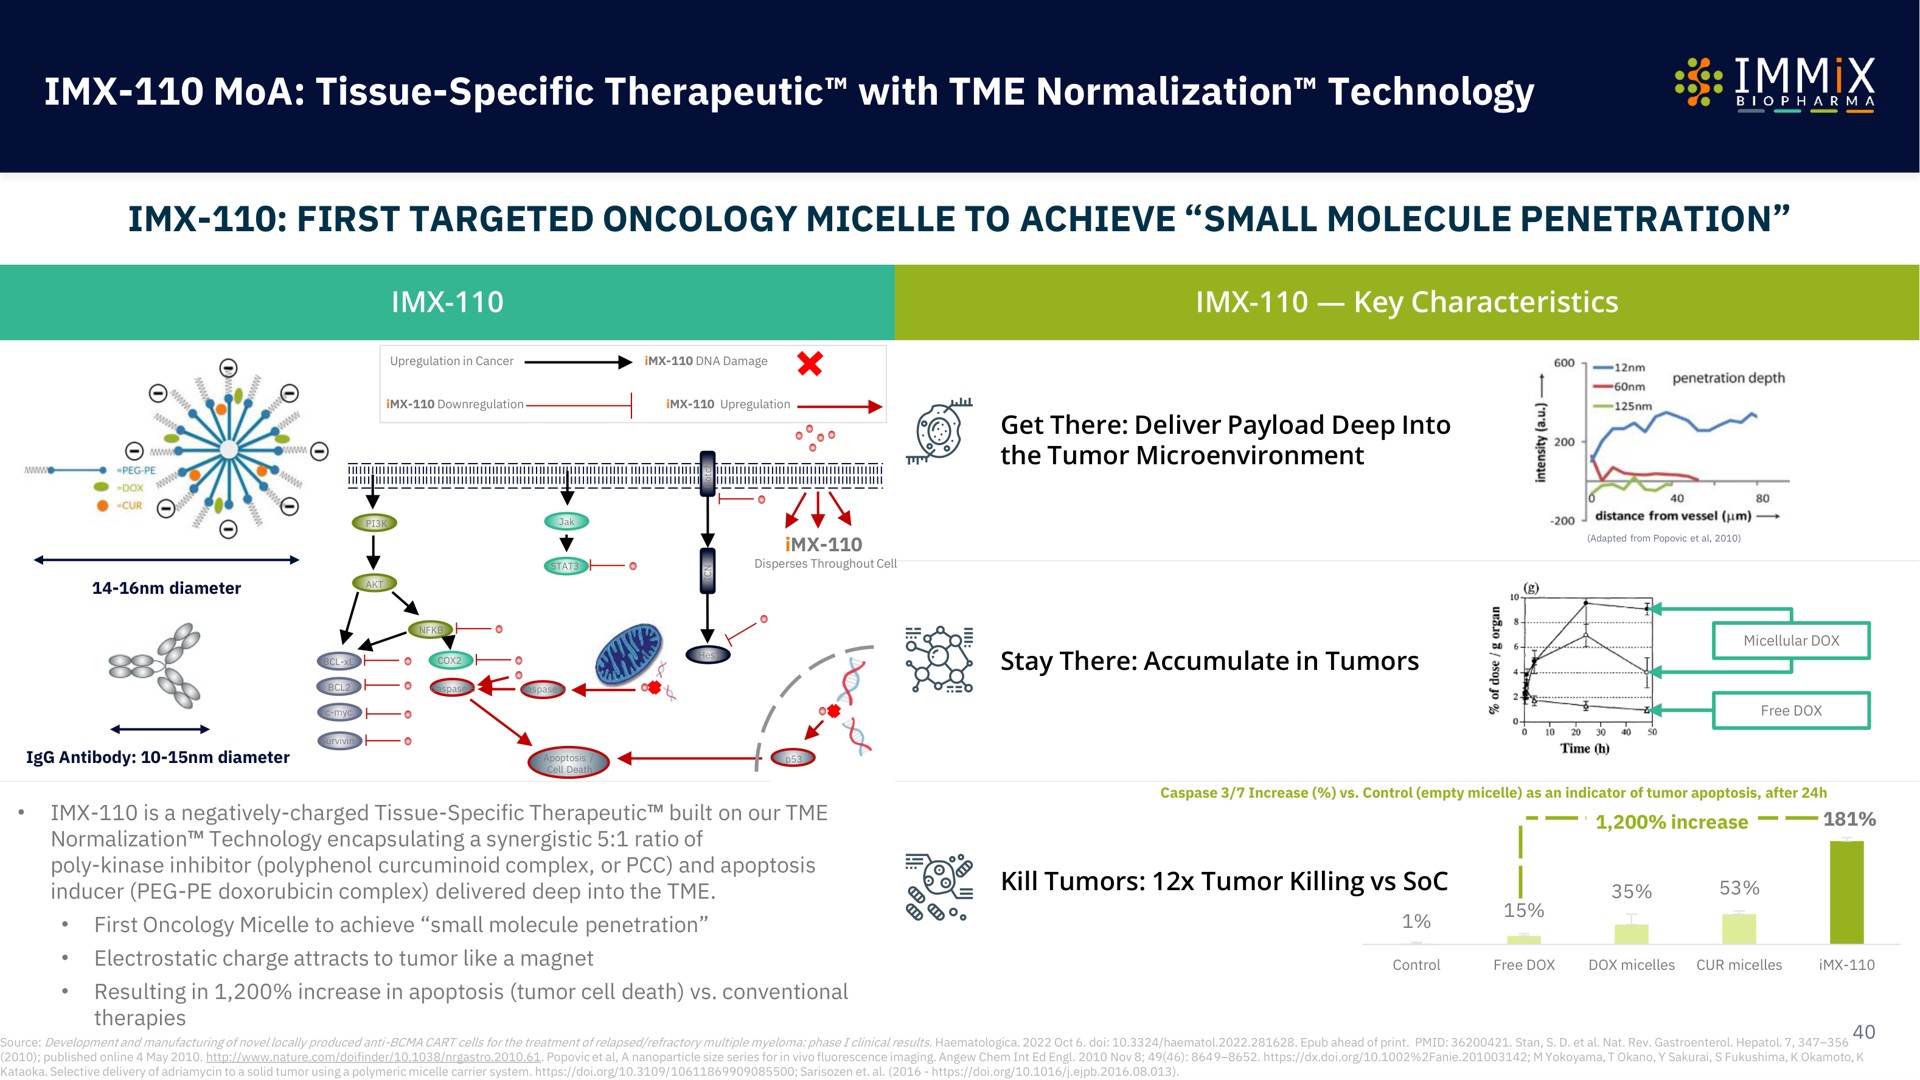 tissue specific therapeutic with normalization technology first targeted oncology micelle to achieve small molecule penetration as | Immix Biopharma